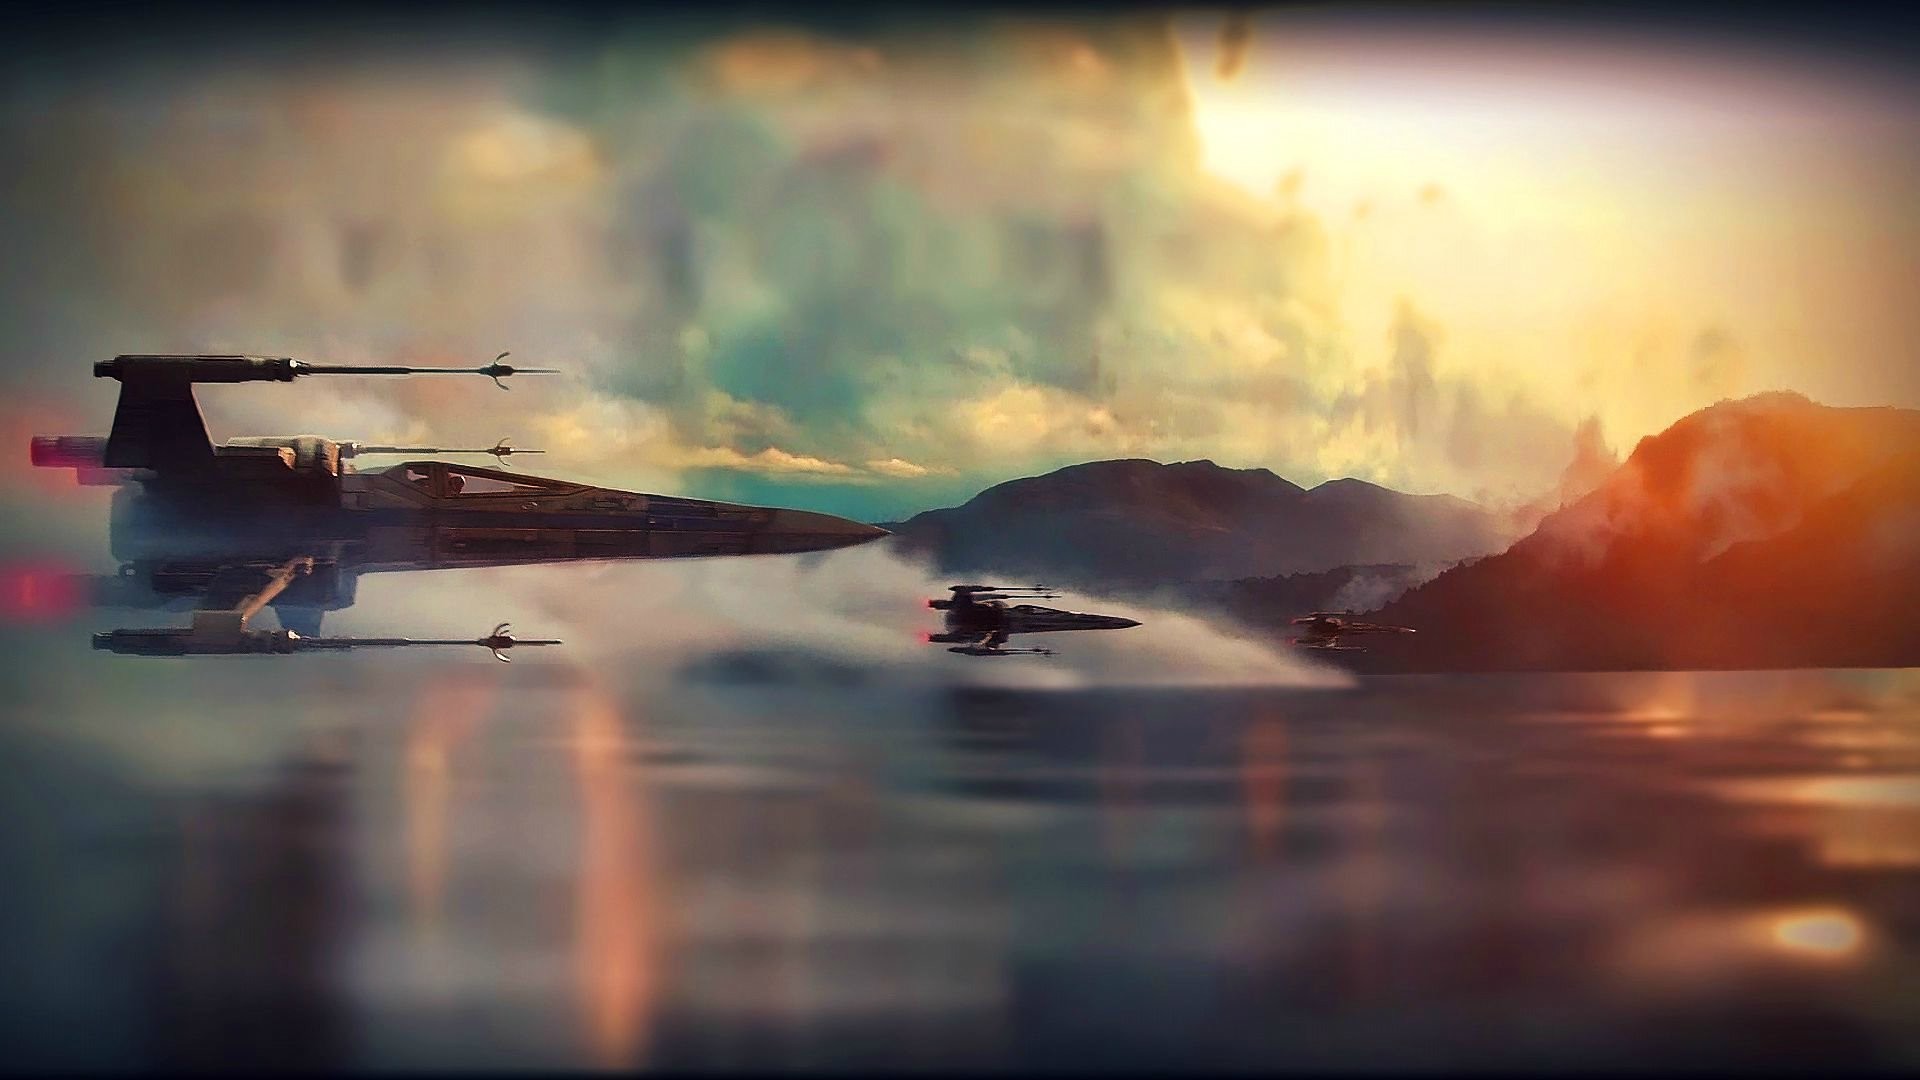 Star Wars Force Awakens Wallpapers 73 images